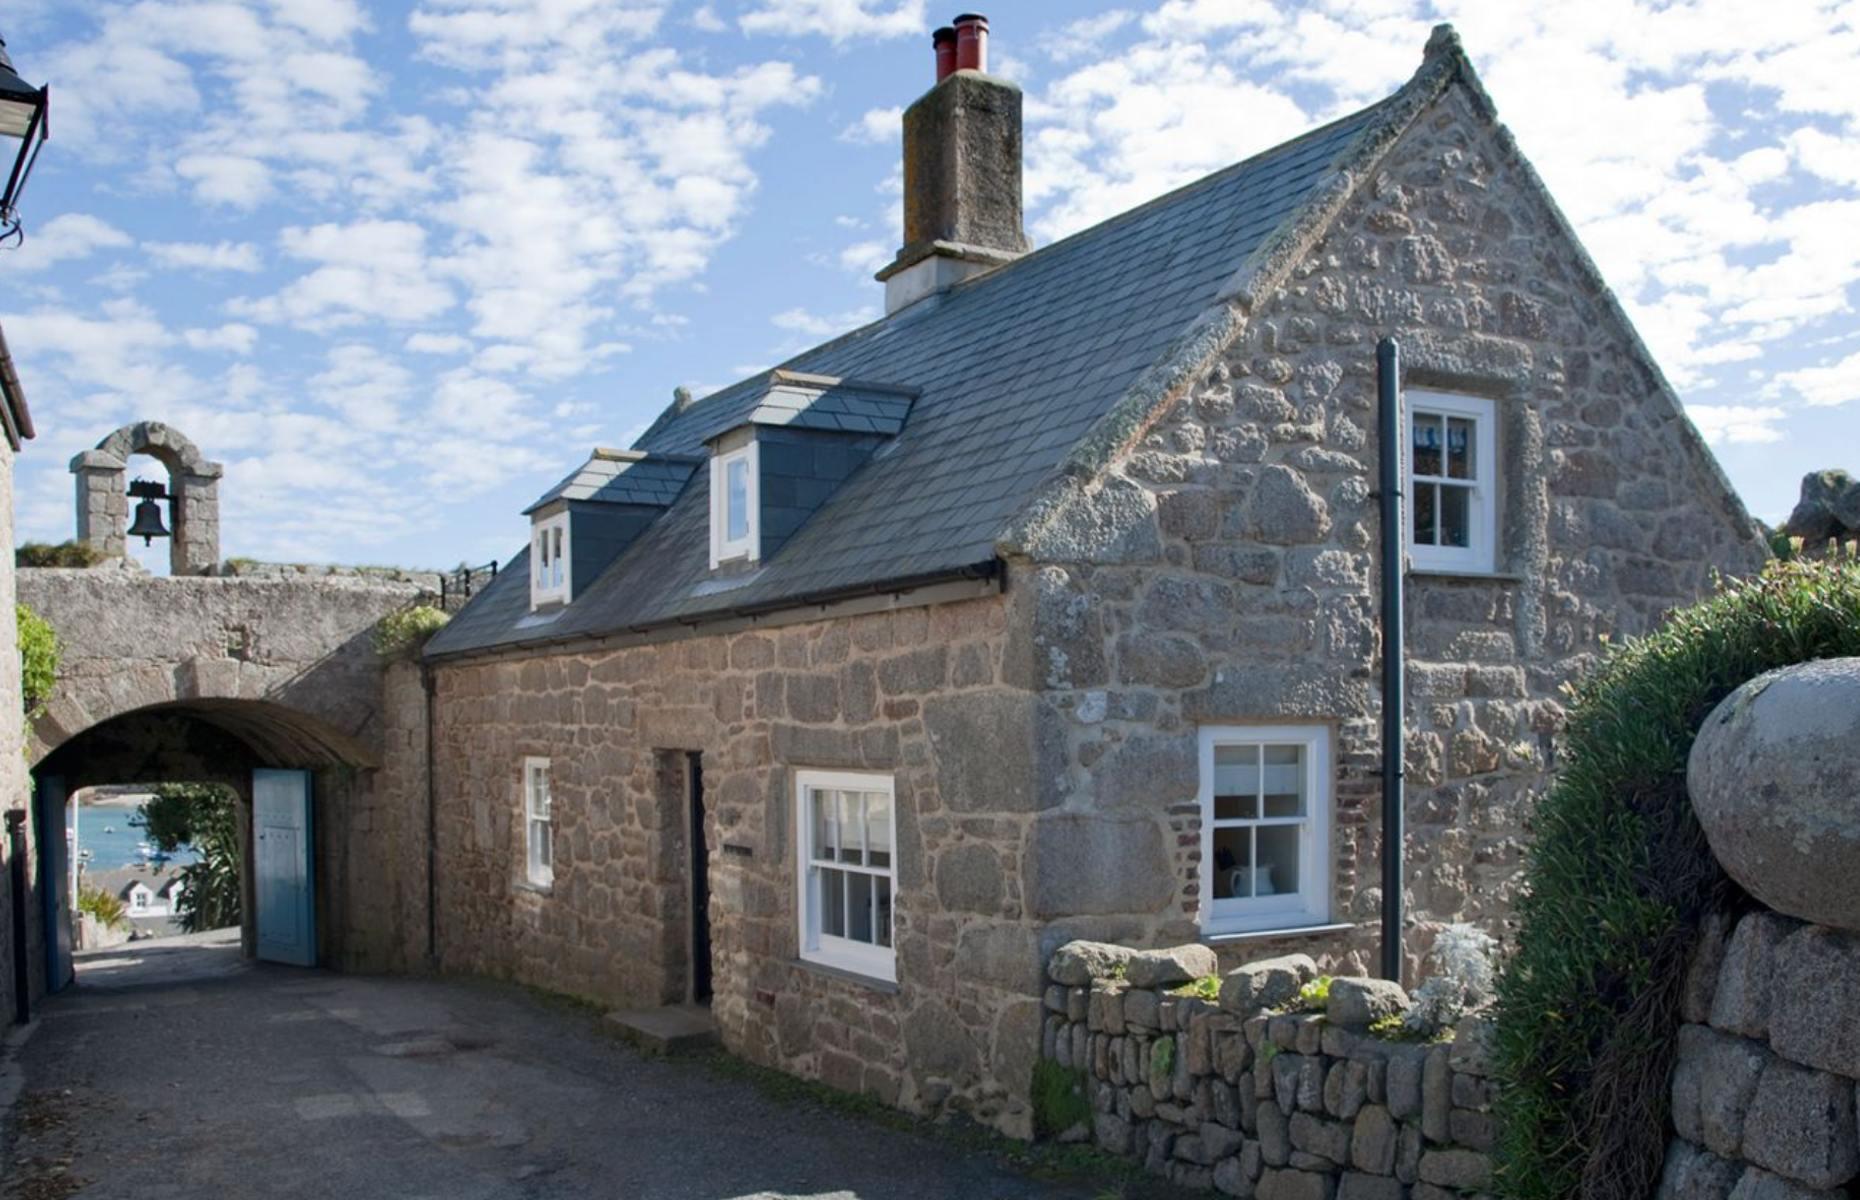 <p>The Duchy of Cornwall also owns other properties on the island, including the charming Gatehouse Cottage which is nestled against the Elizabethan Garrison walls above Hugh Town on St Mary’s.</p>  <p>The two-bedroom home was constructed in the early 17th century and, as the name suggests, was originally adjacent to the Garrison’s main gated entrance. </p>